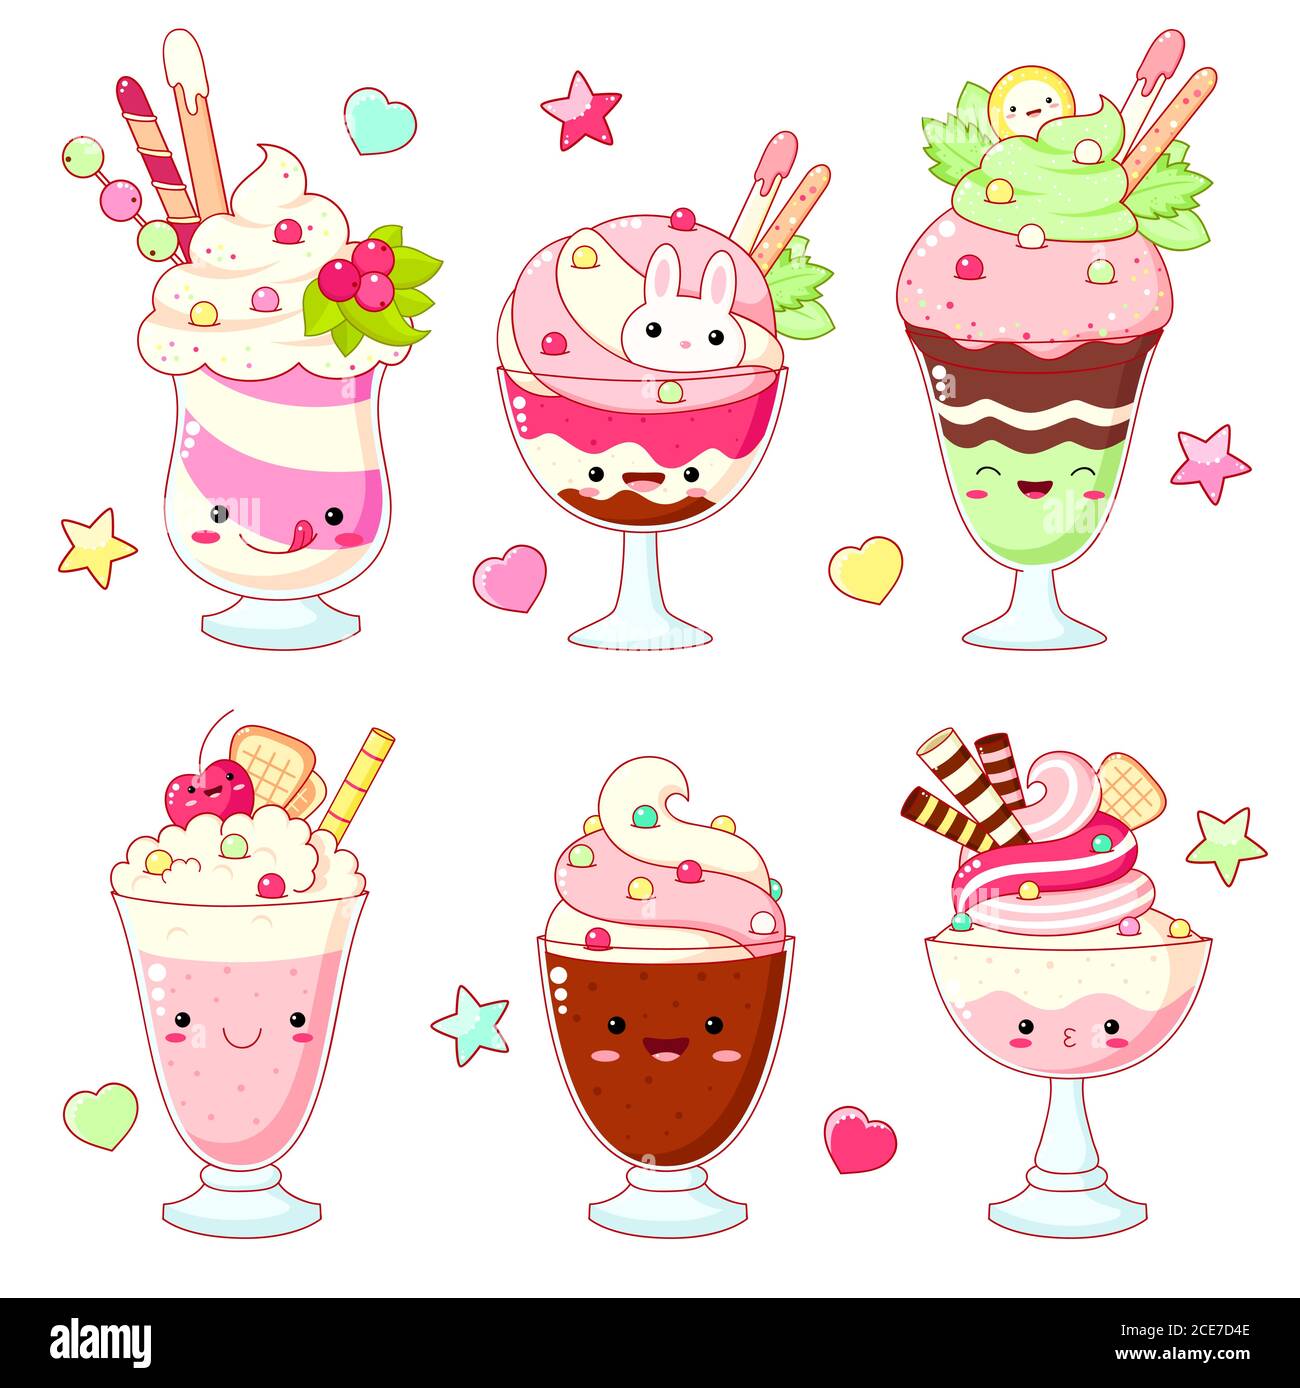 Set of cute sweet icons in kawaii style with smiling face and pink ...